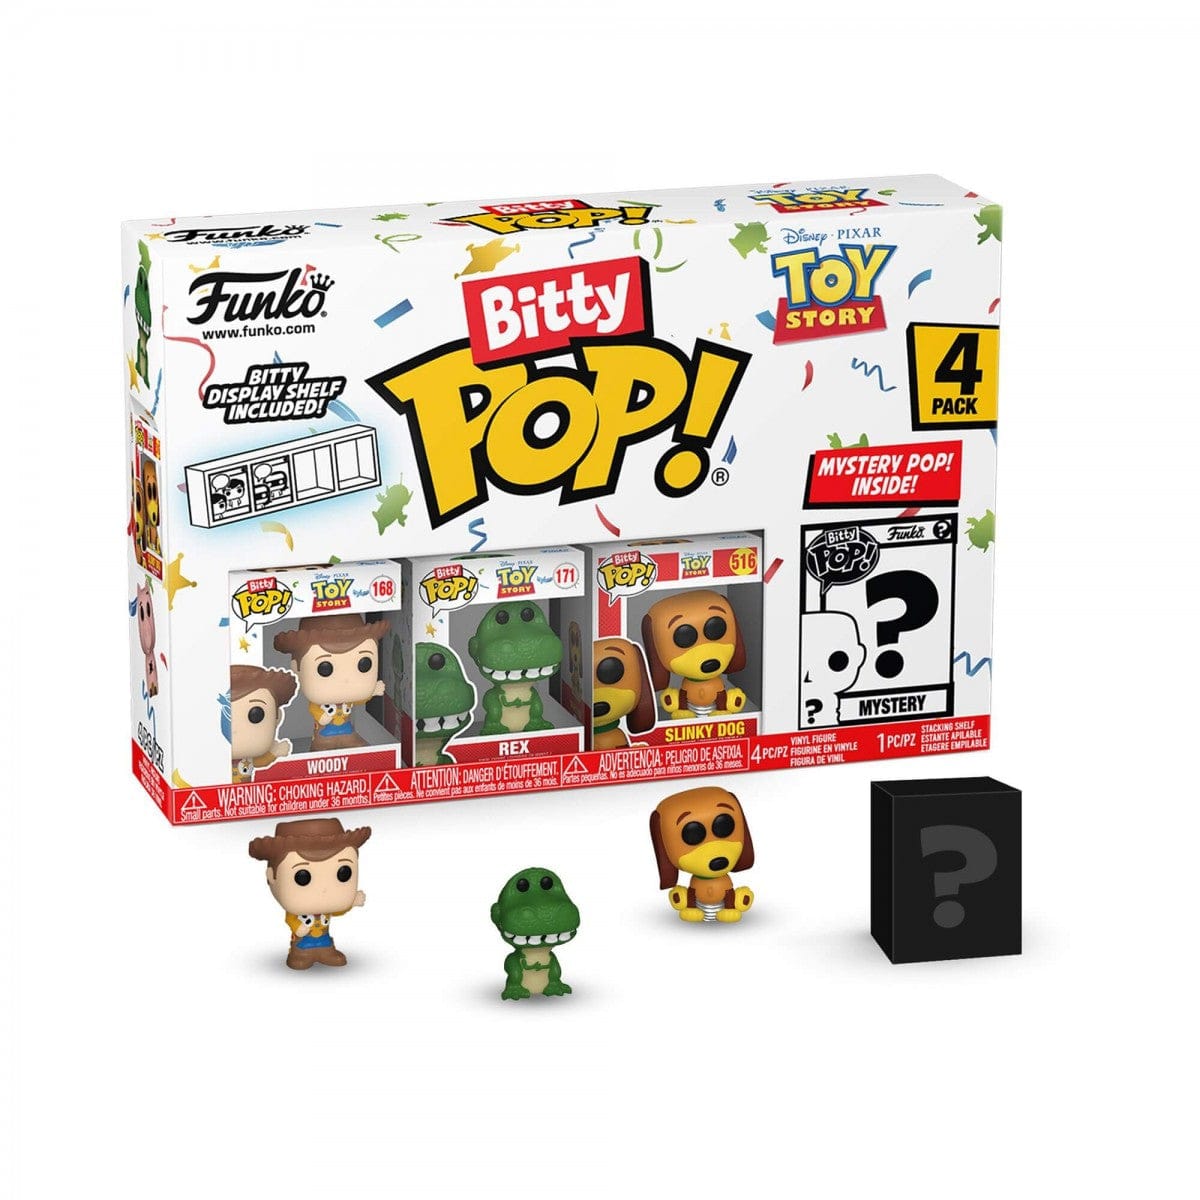 Funko Bitty POP 4 Pack: Toy Story 4 889698730426